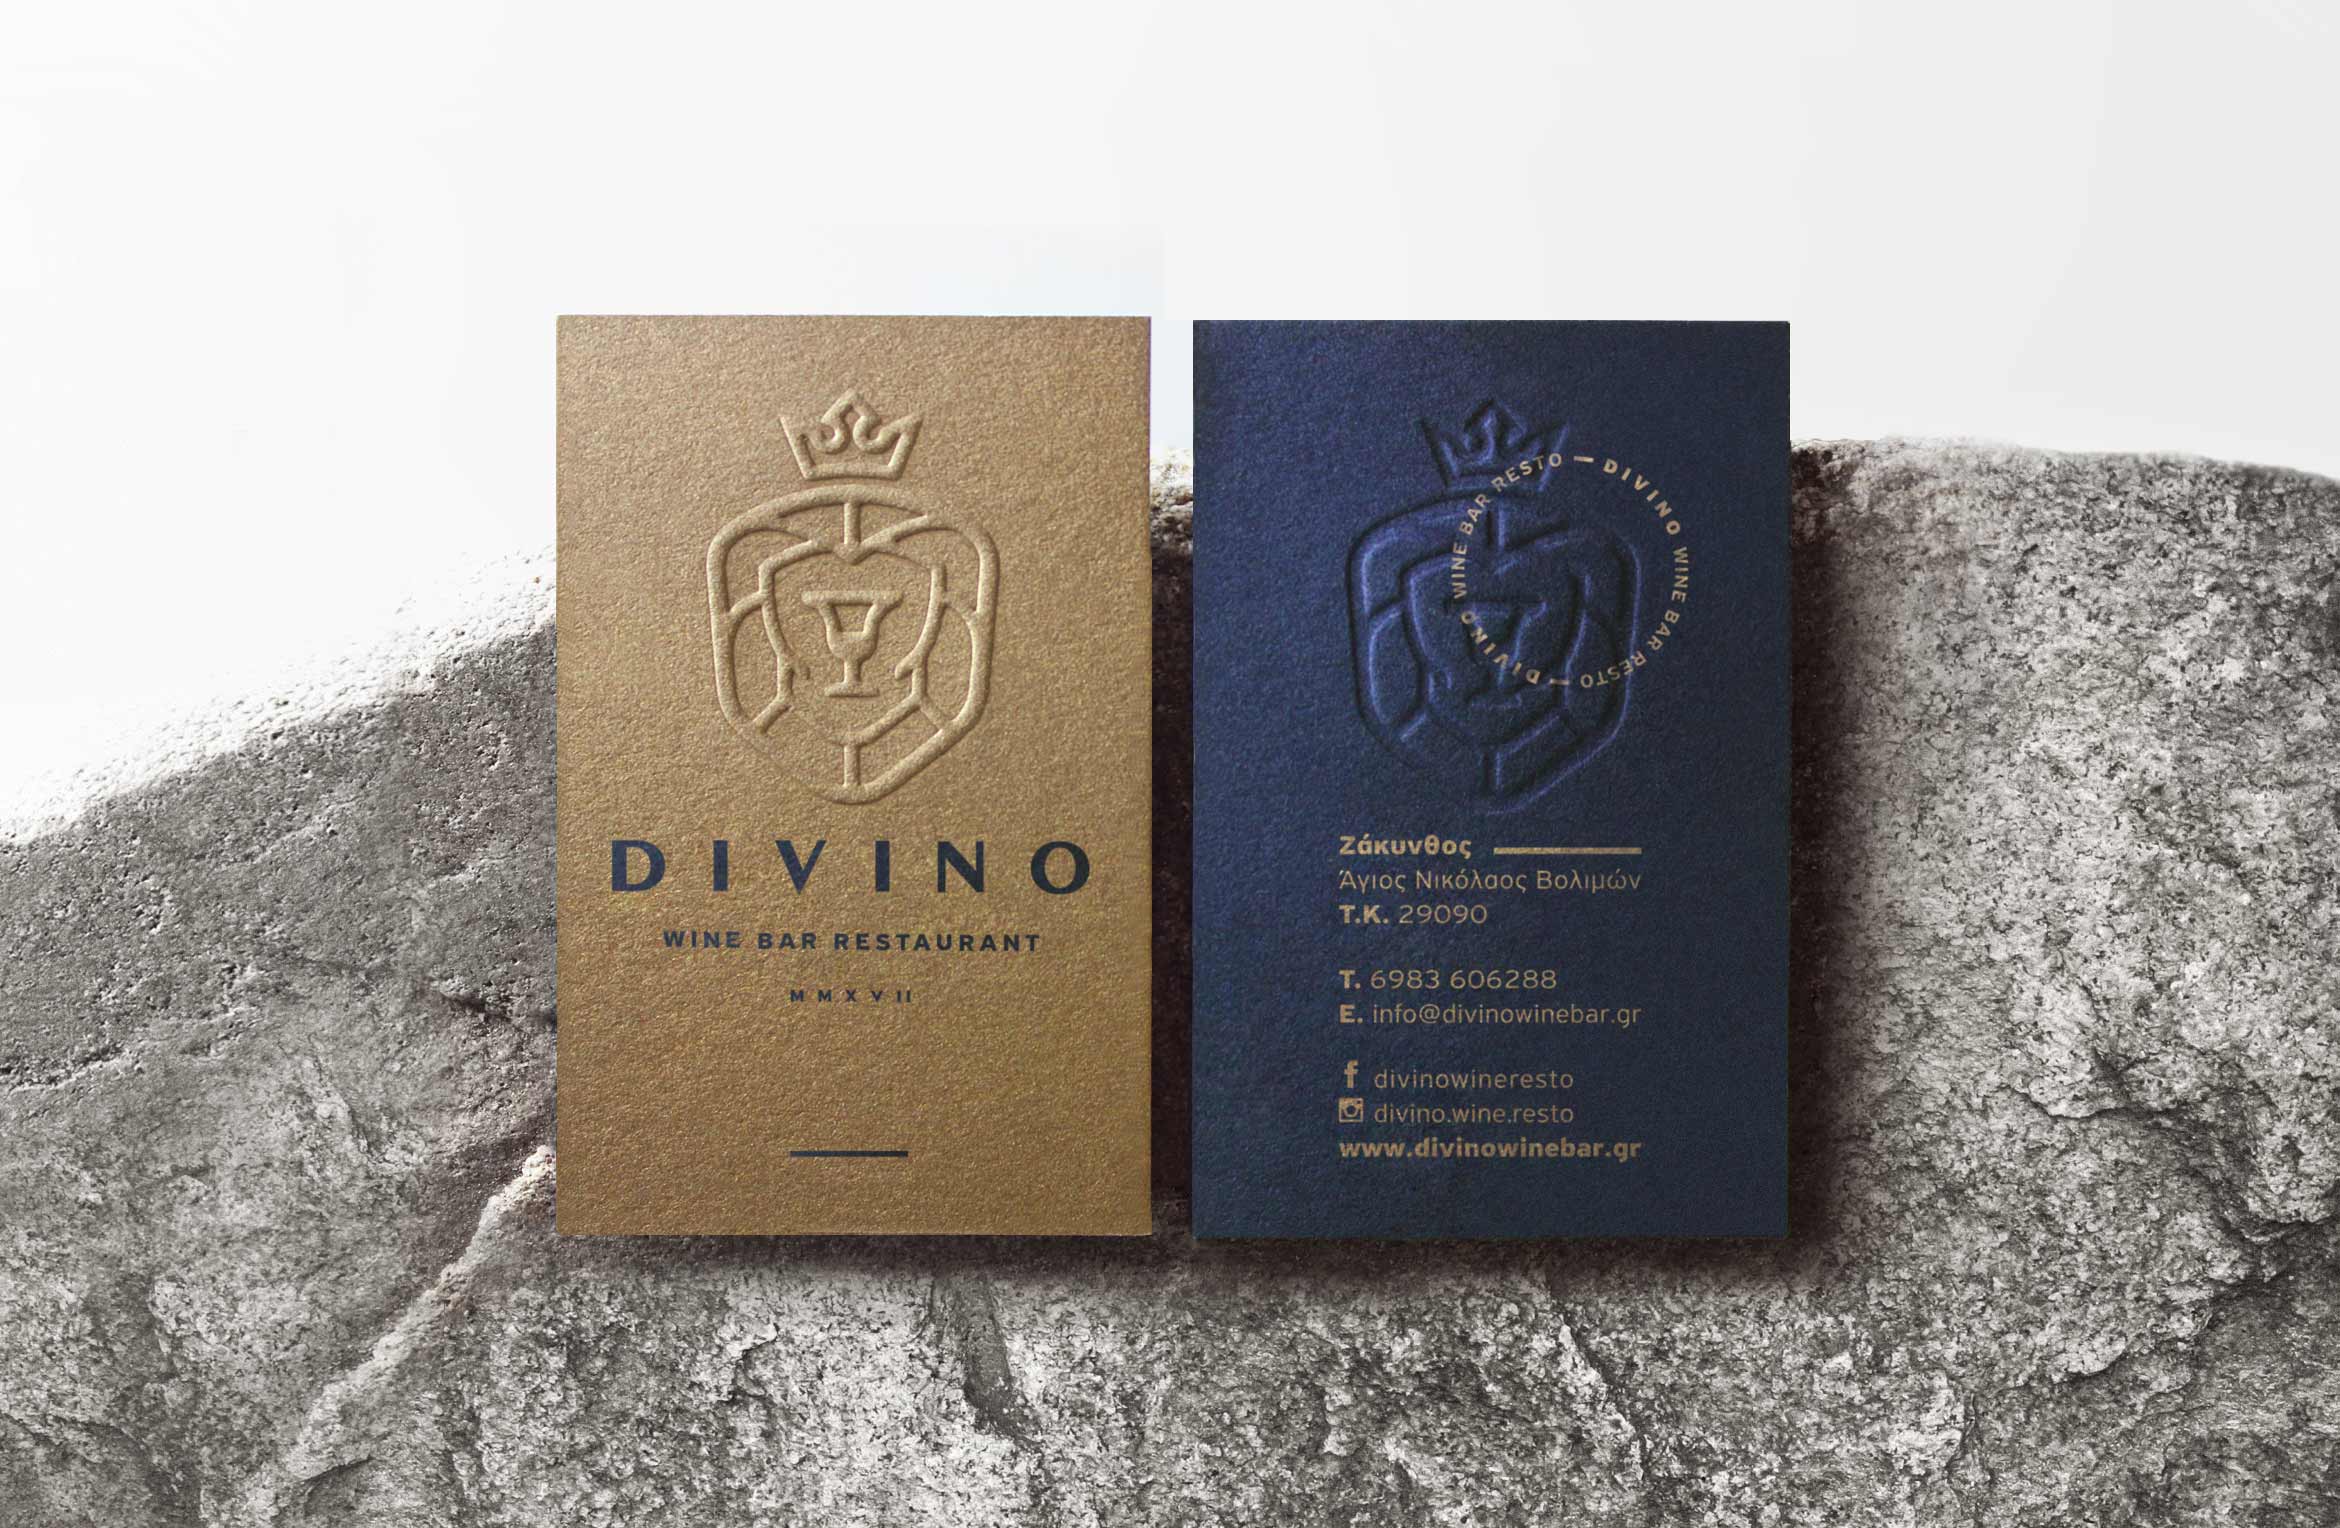 Divino business cards by Dot Creative Studio